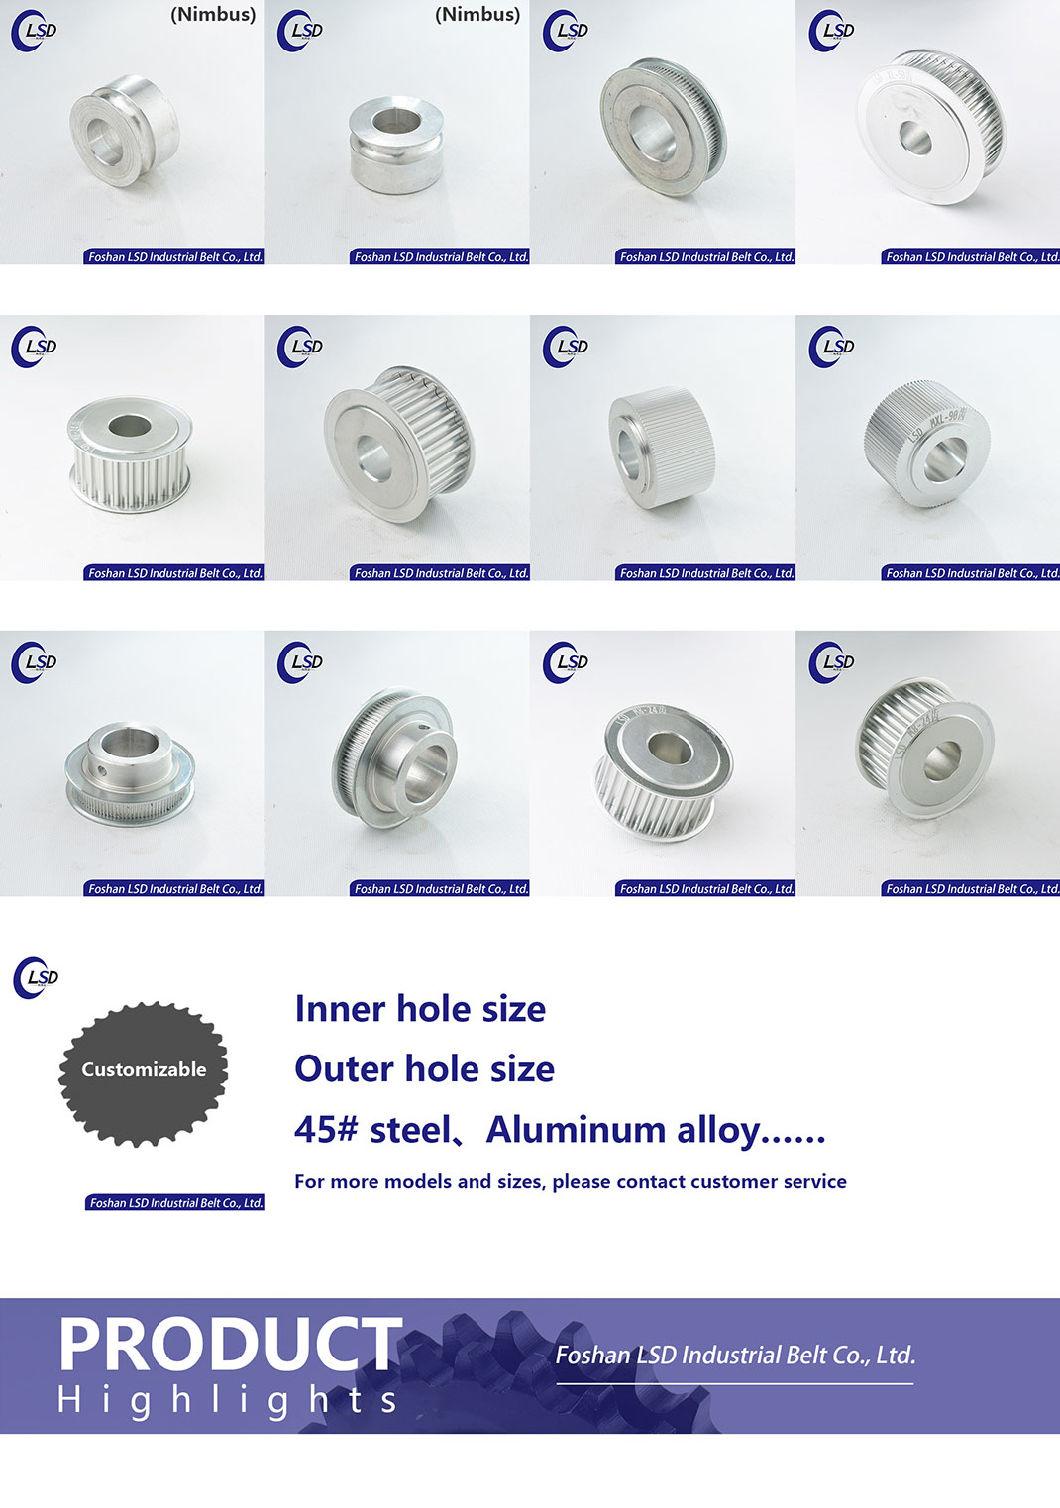 Factory Customized High Precision Timing Pulley for Tooth Type 1.5gt Gt2 3gt 5gt Mxl XL L H Xh Xxh 2m 3m 5m 8m 20m T5 T10